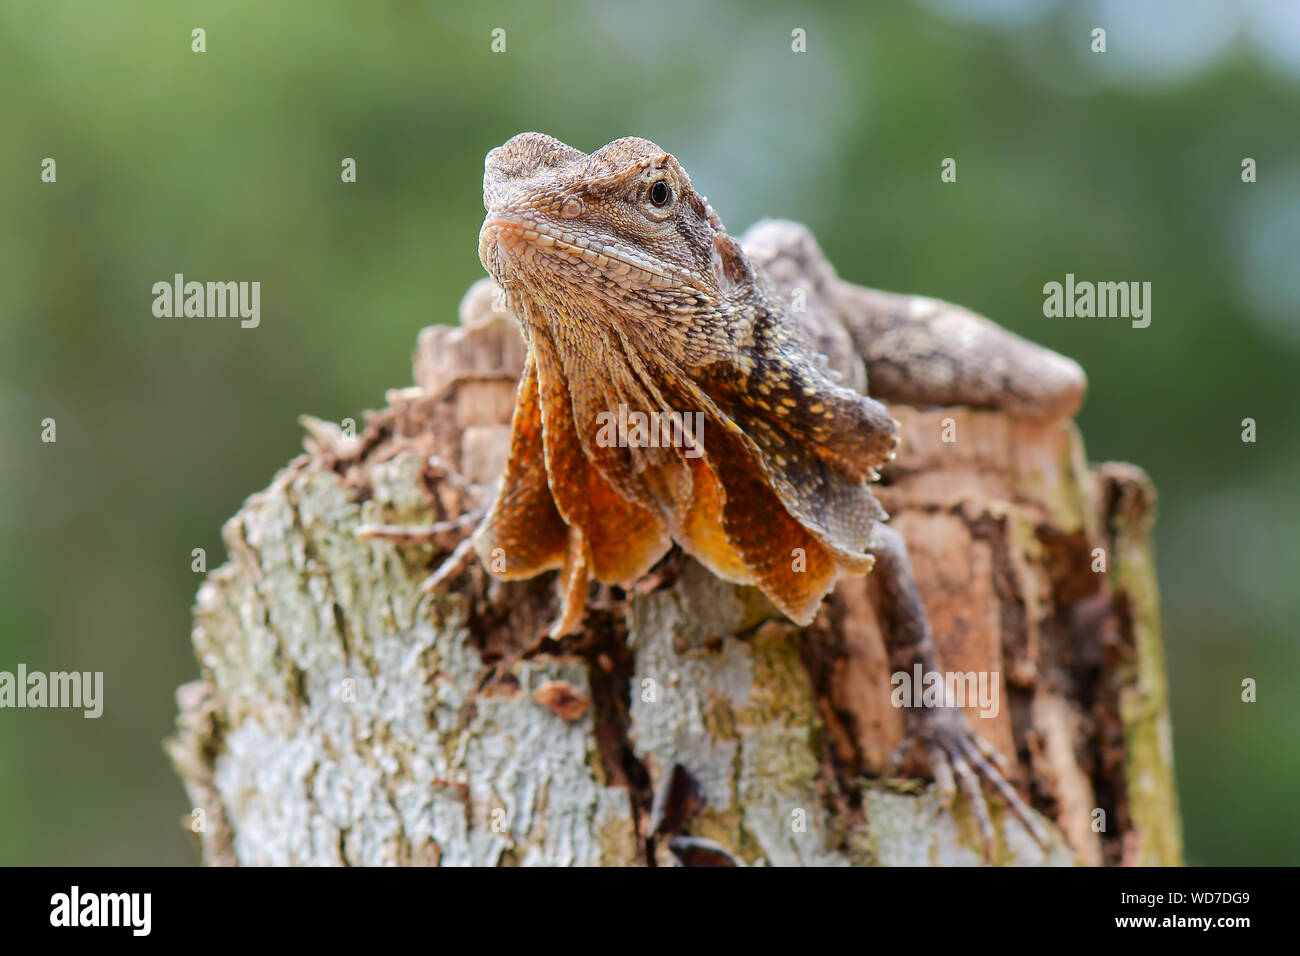 Close-up Of Frilled Lizard On Wood Stock Photo